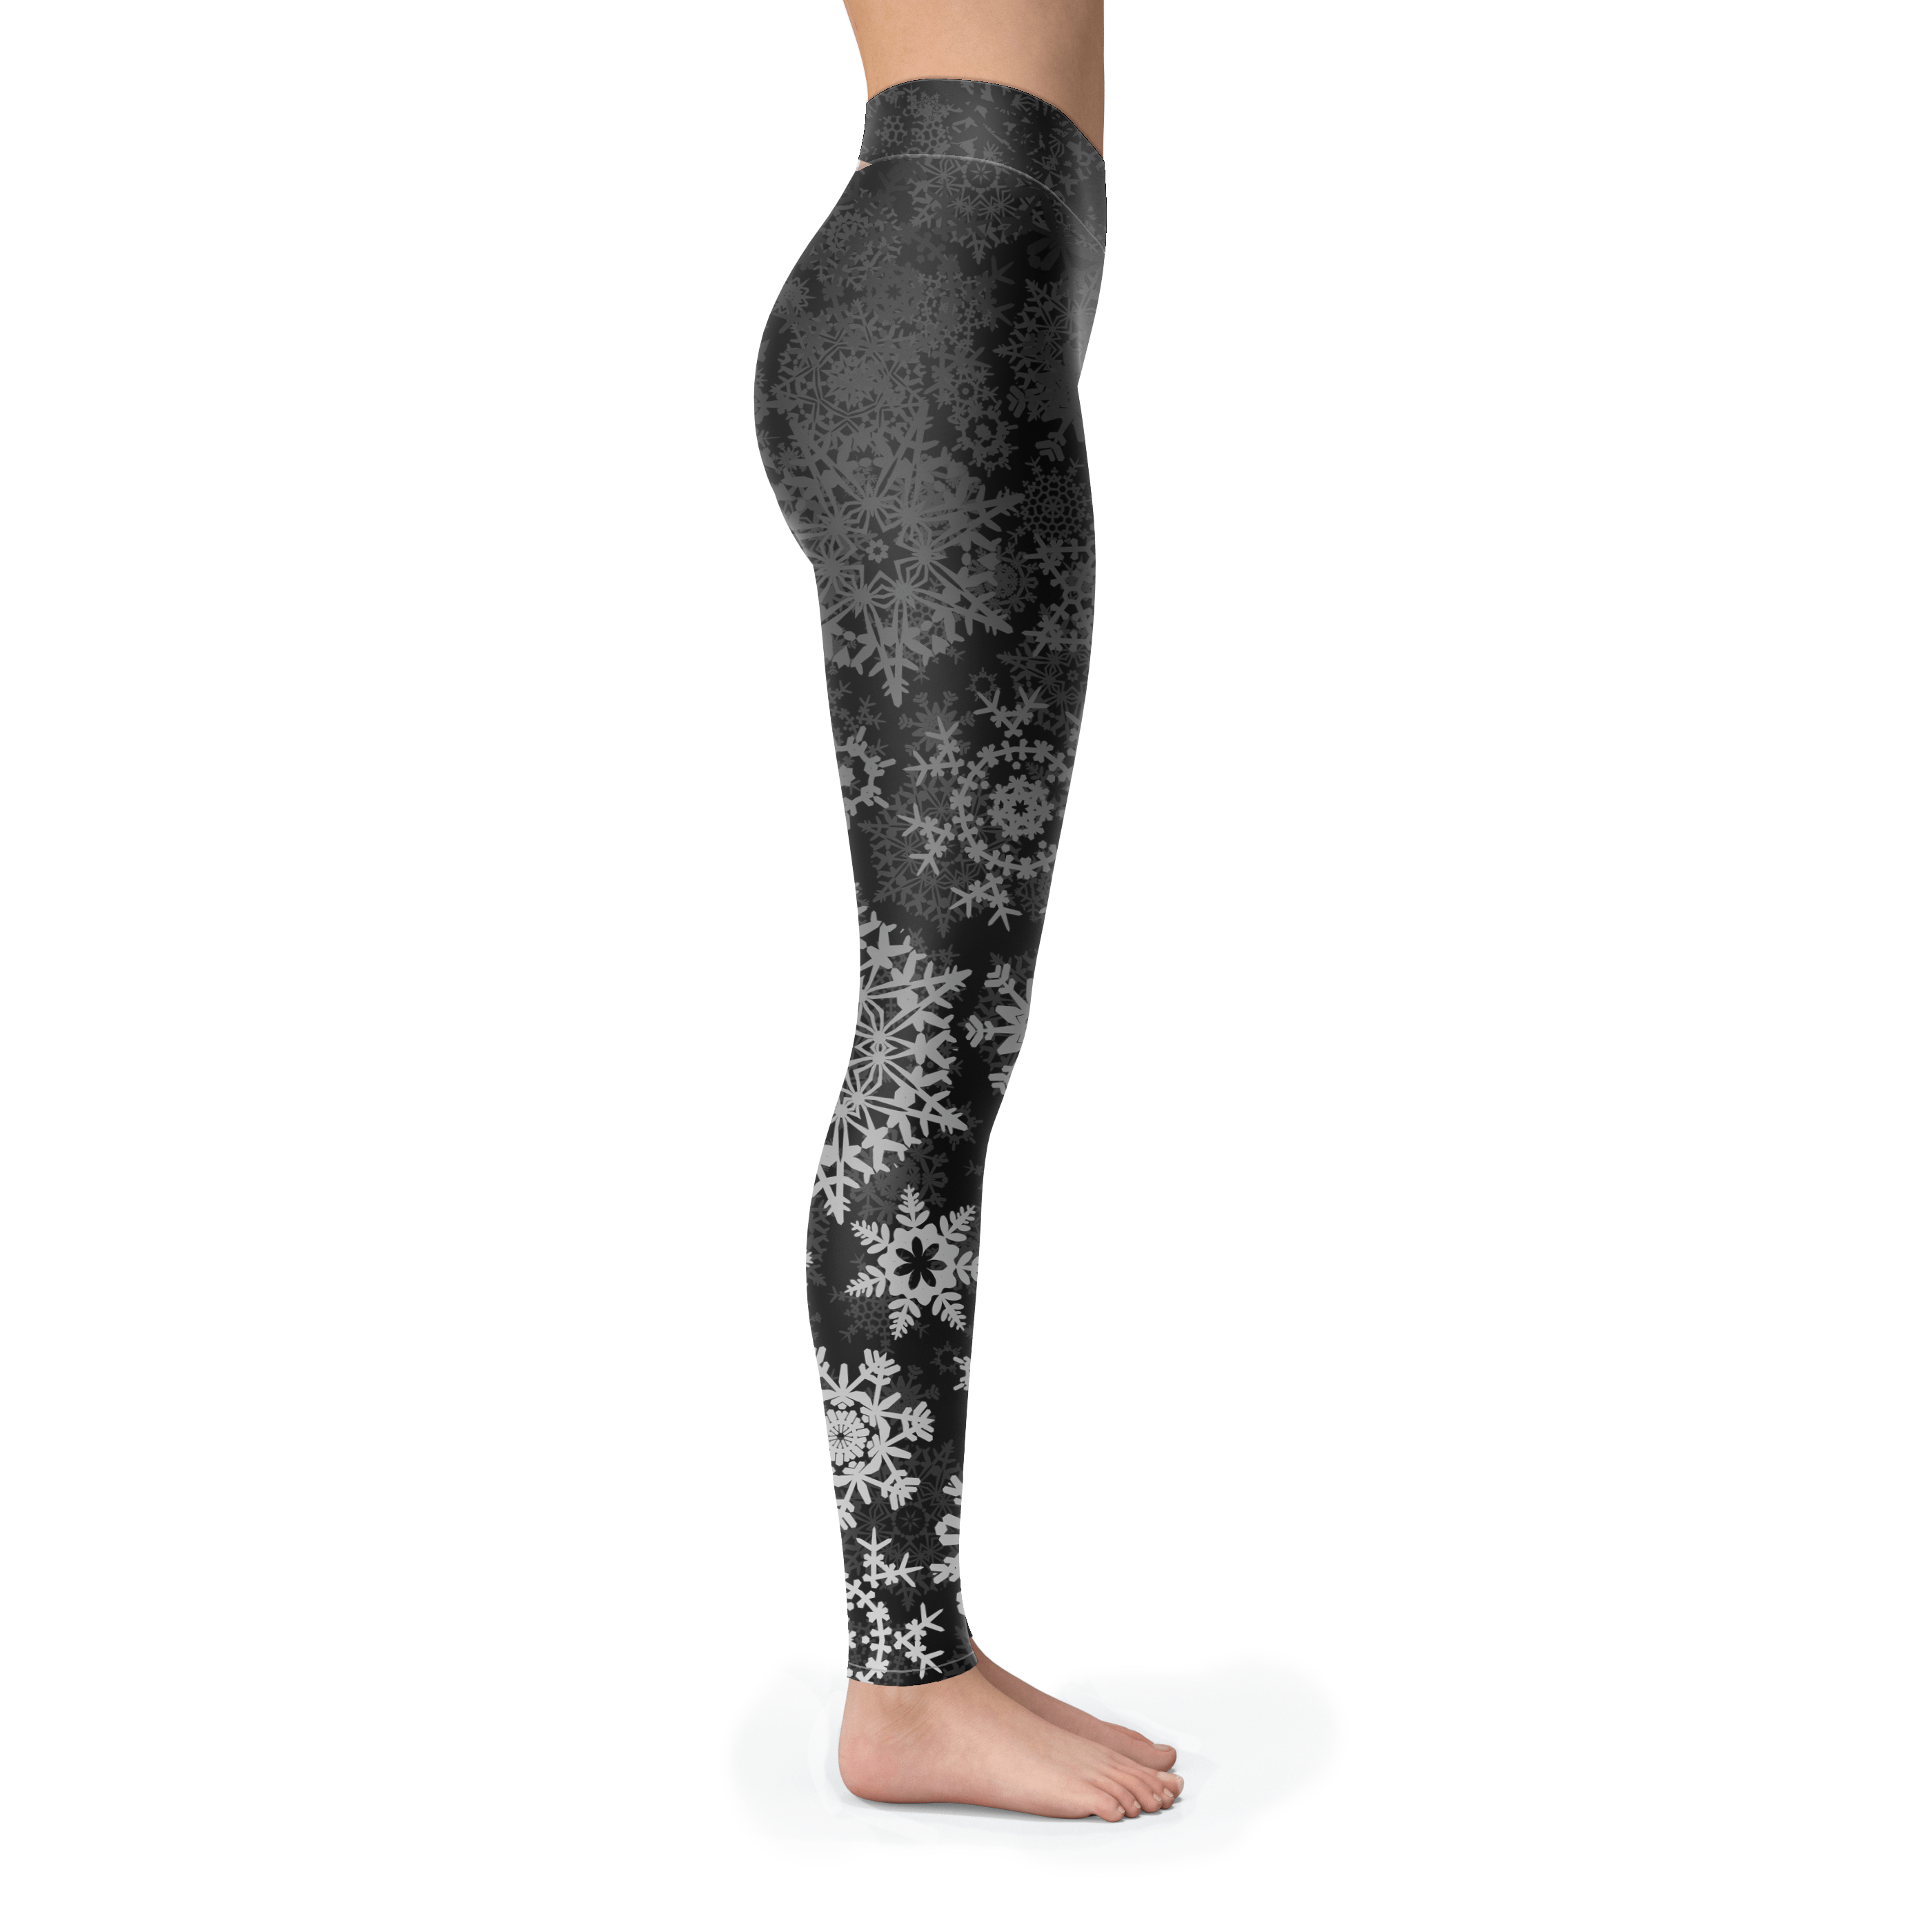 African American Fashion Model in Black Leggings Stock Image - Image of  grey, silver: 21909331